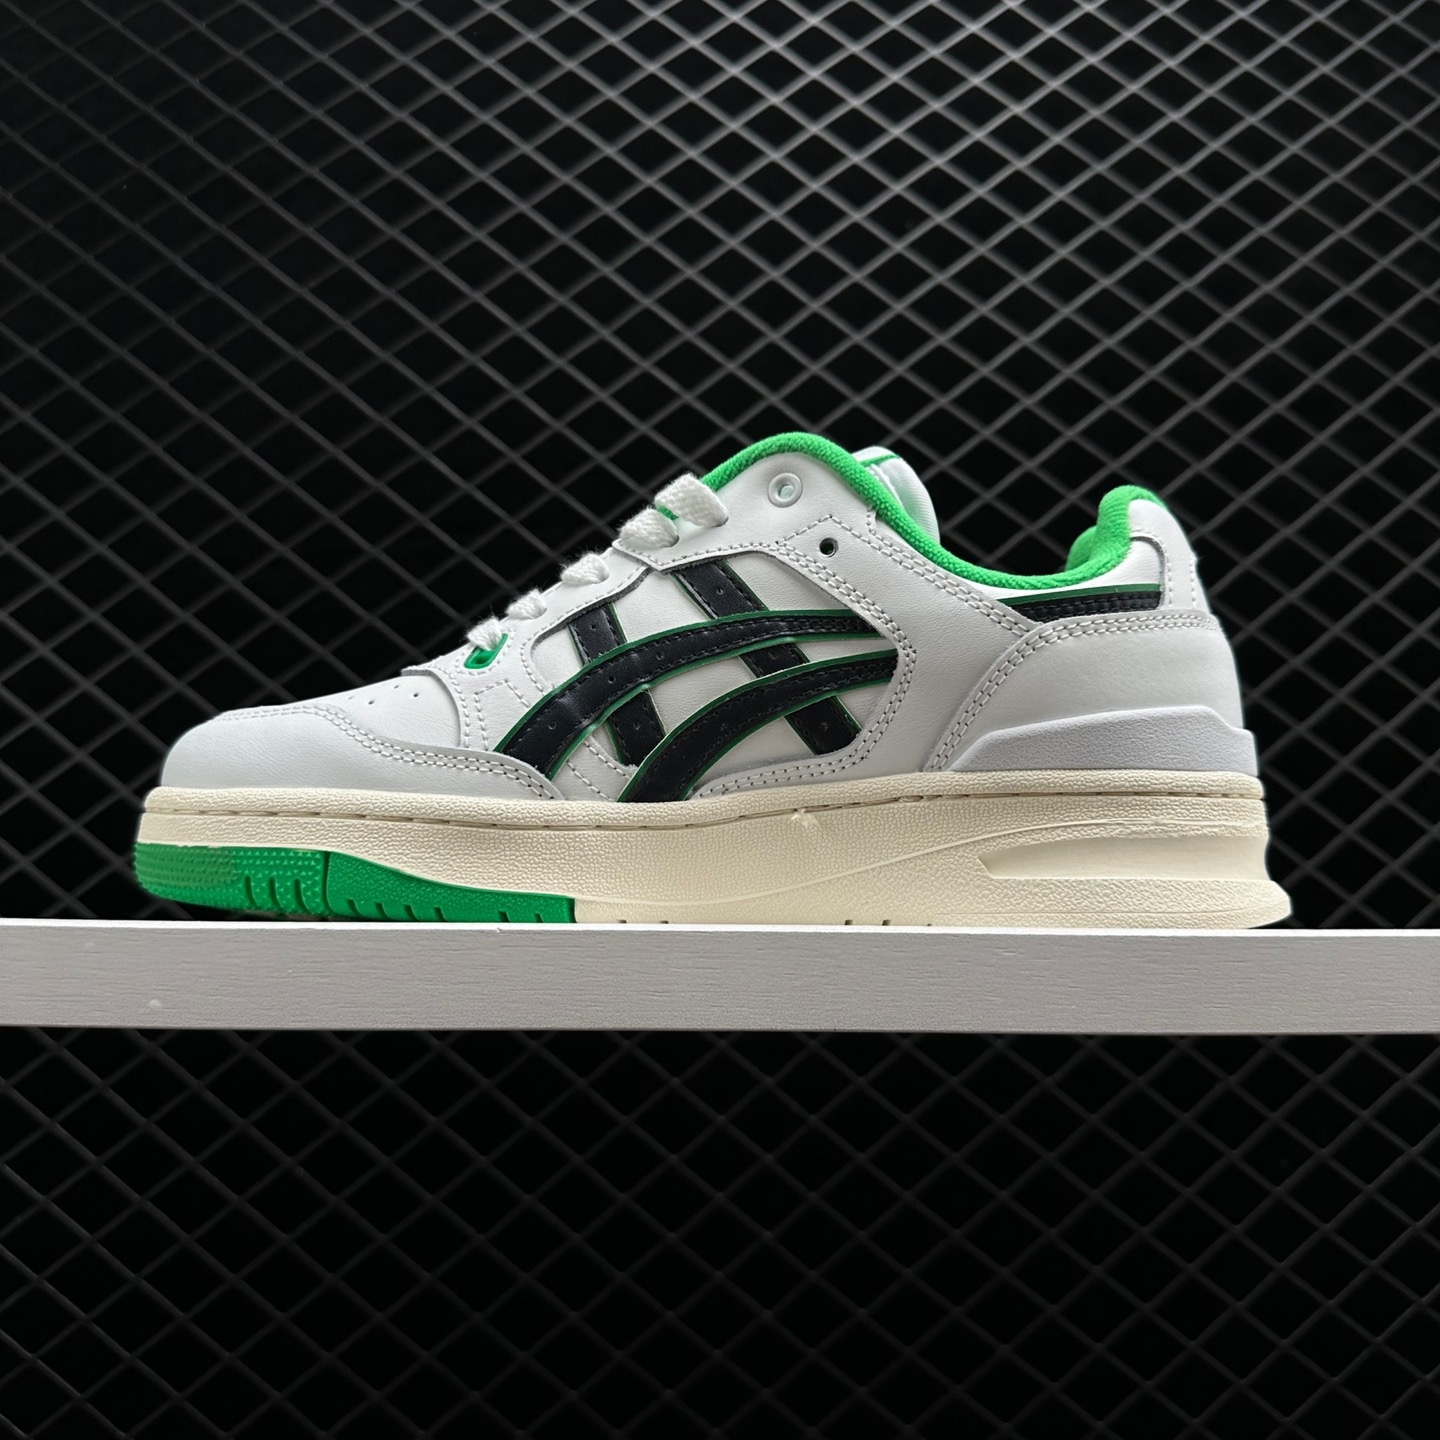 Asics EX89 Celtics 1201A476-106: Stylish and Supportive Sneakers